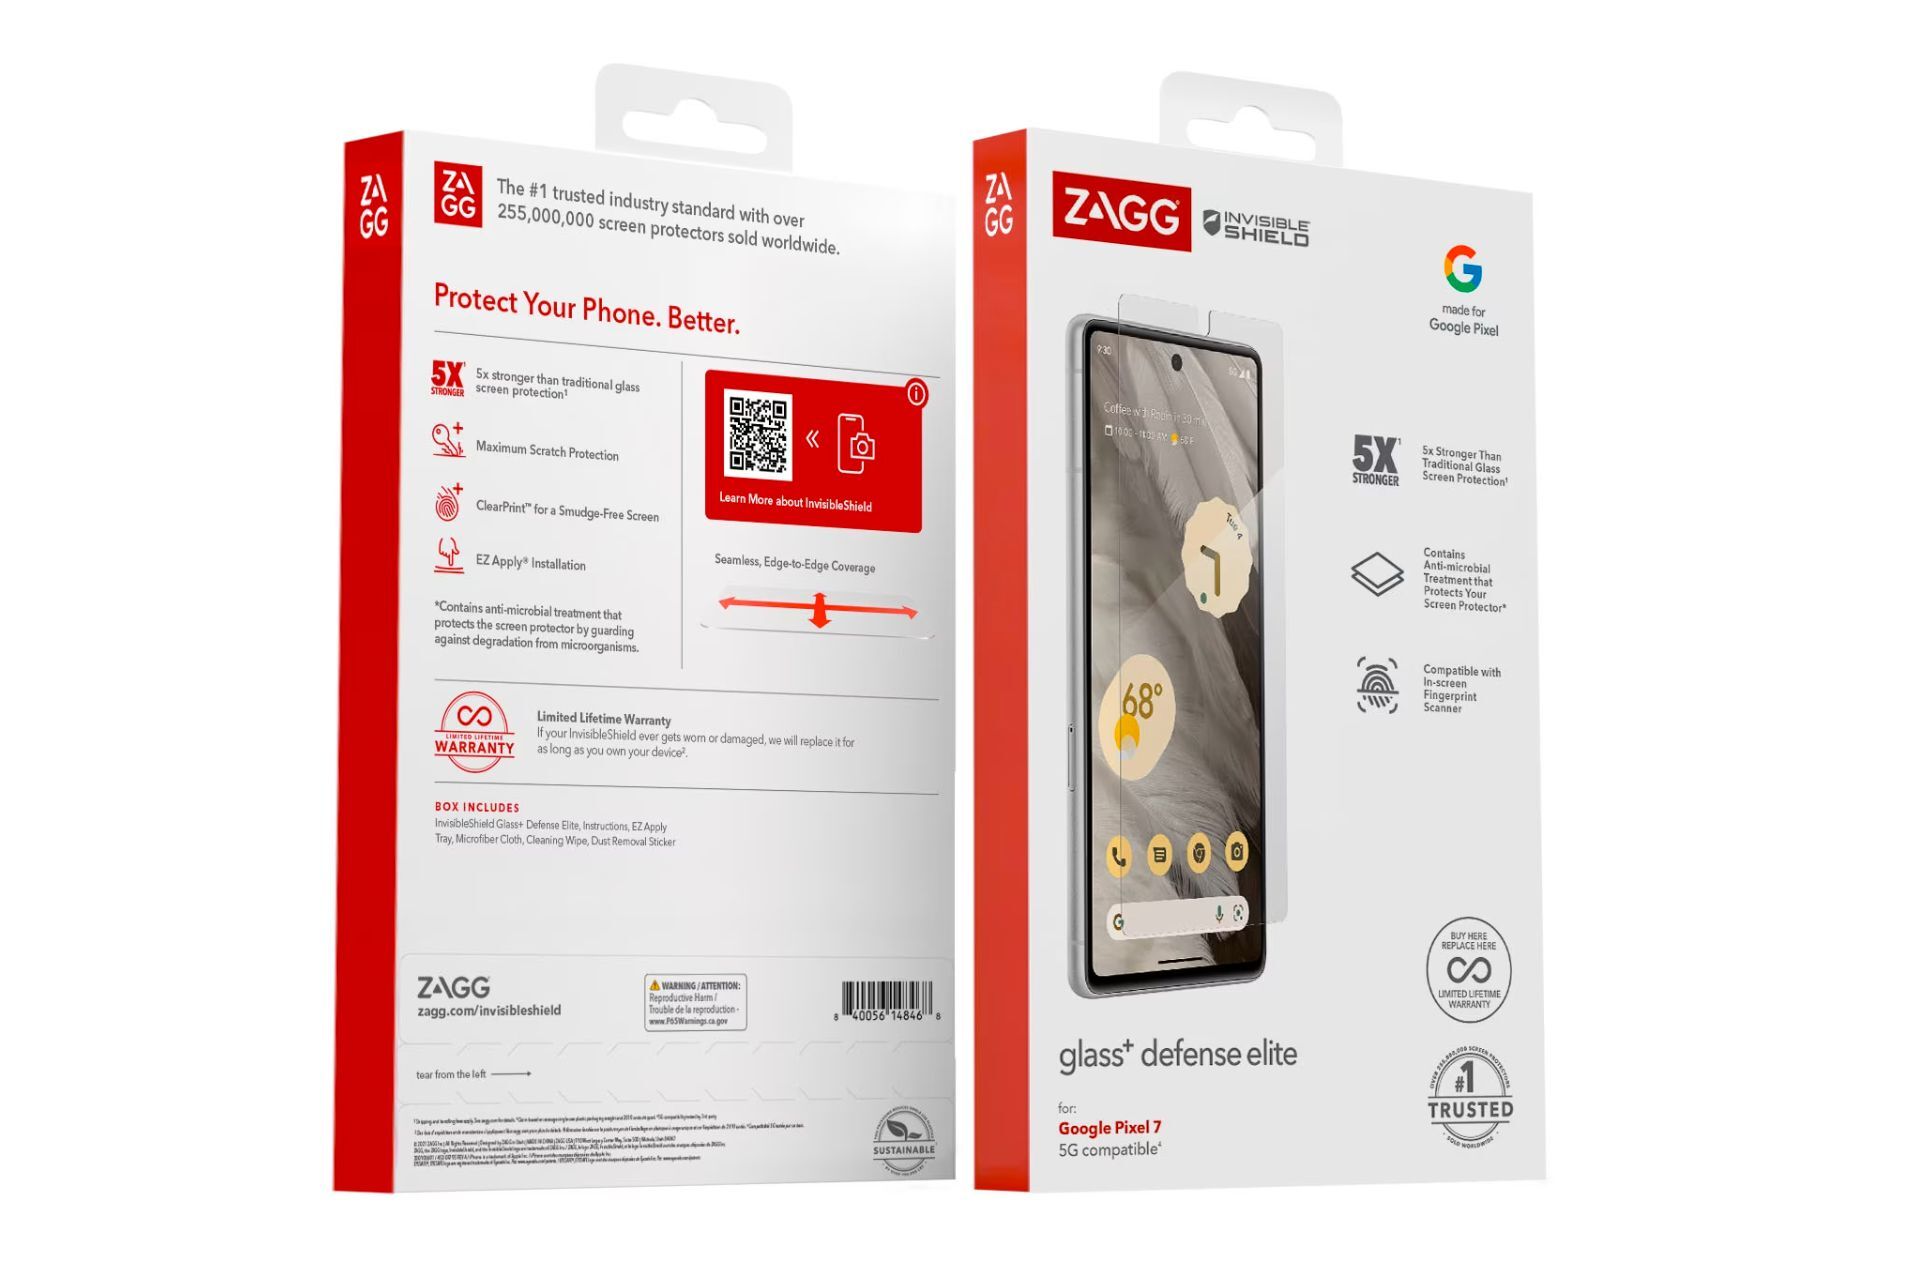 ZAGG Invisible Shield Glass+ Defense Elite Pixel 7 Screen Protector - The best Pixel 7 series screen protectors - out handpicked models